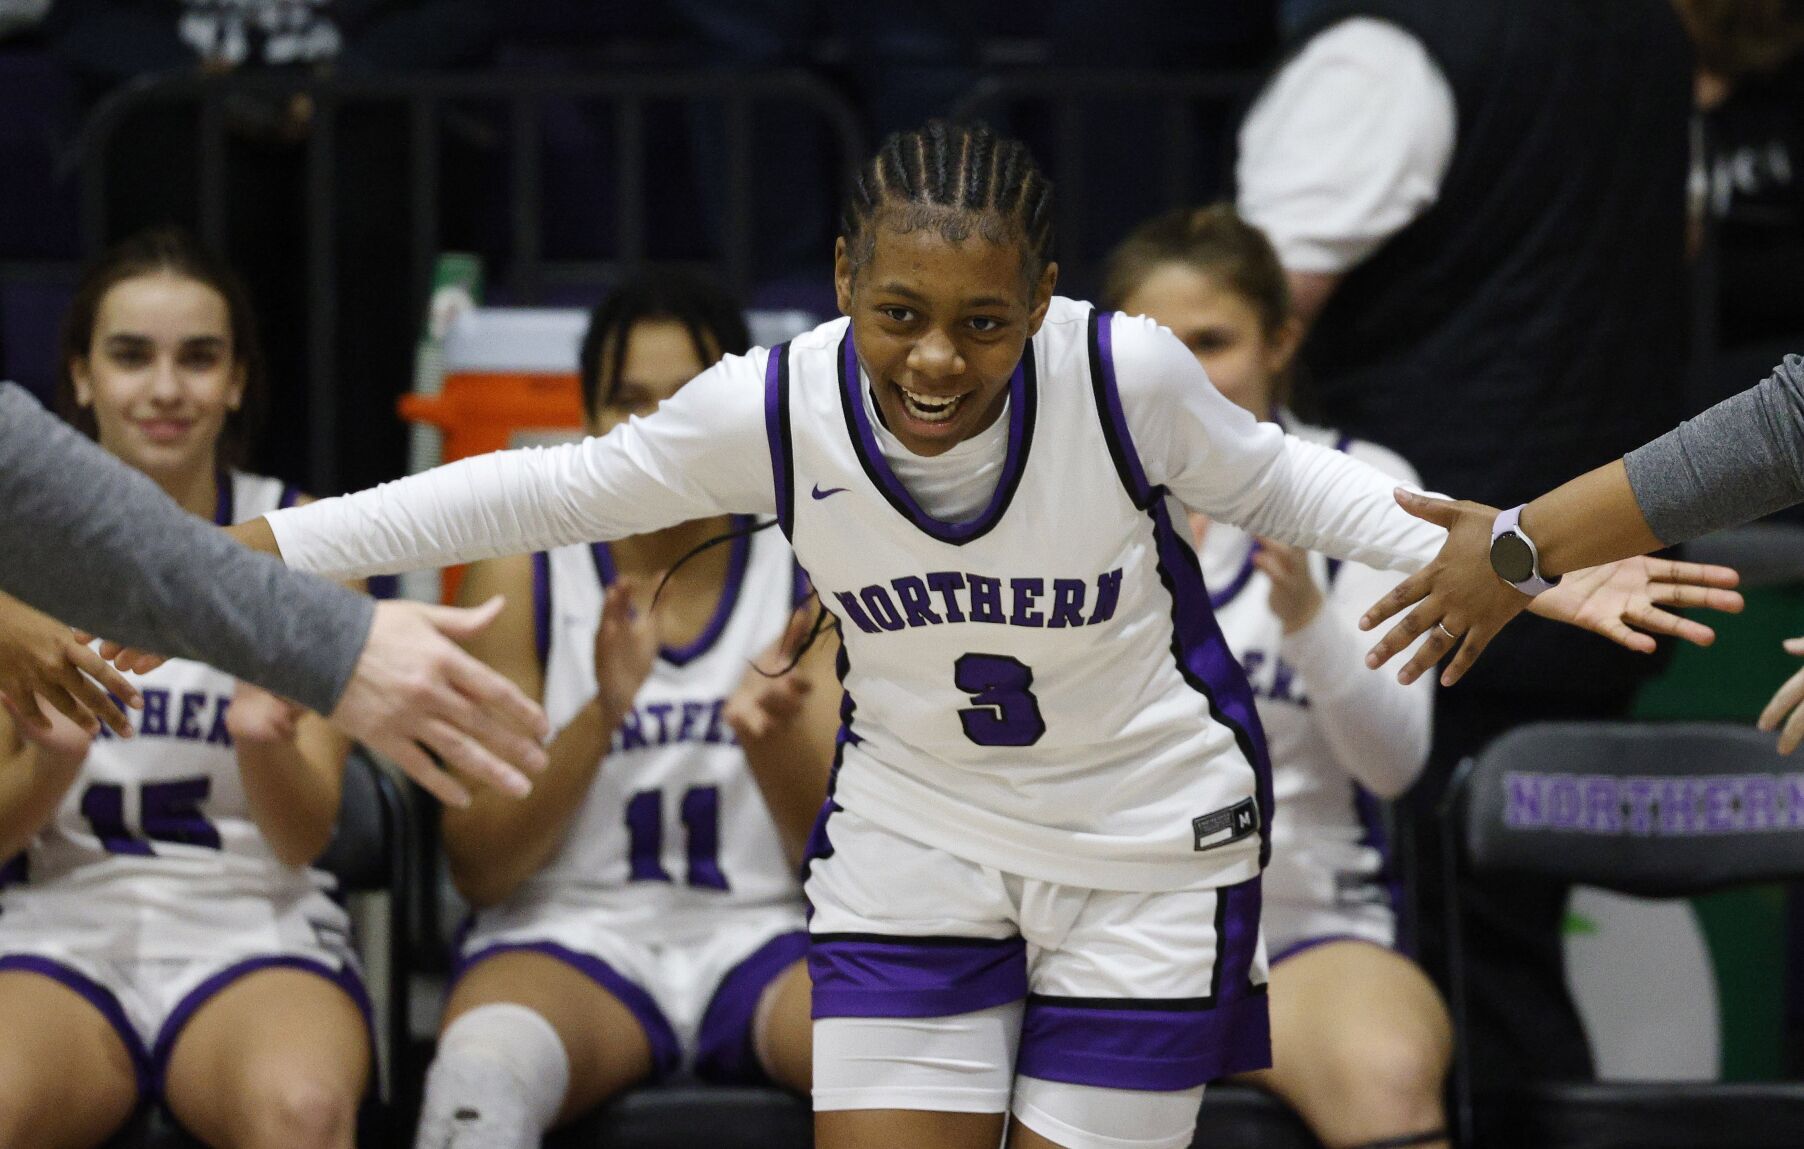 Northern Guilford’s McField named as a freshman all-American girls basketball player